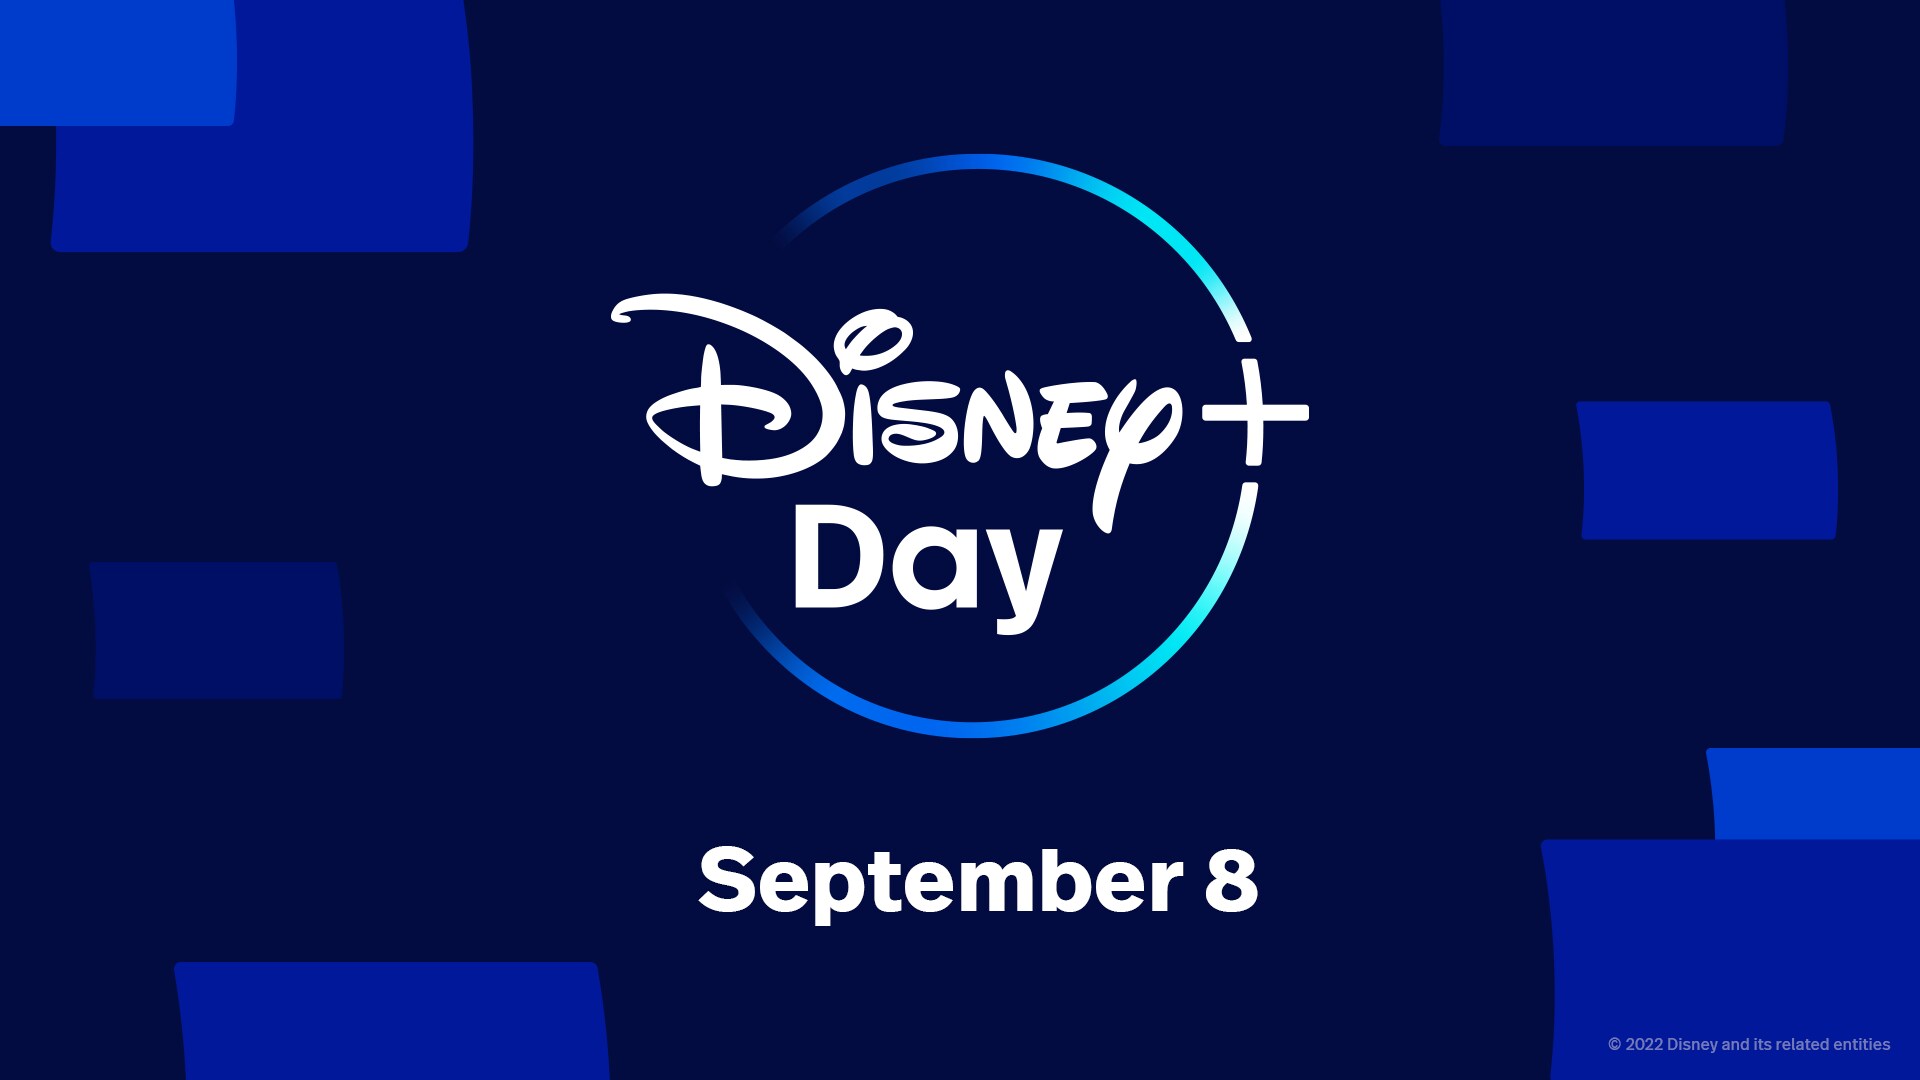 Celebrate Disney+ Day With An Introductory Offer And Special Perks For Subscribers